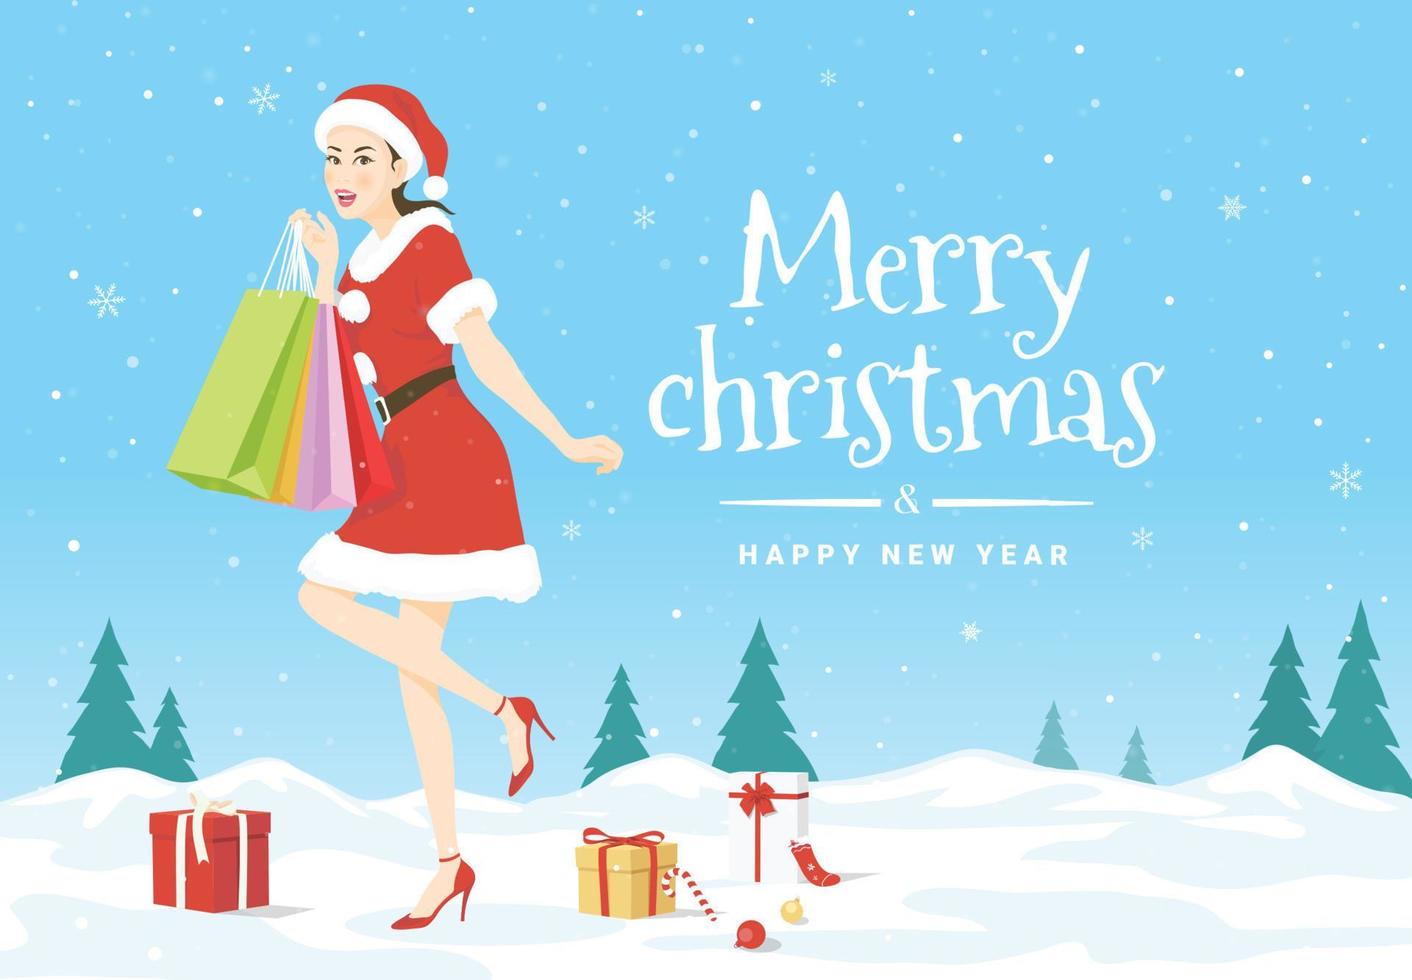 Vector illustration with A beautiful woman in Santa Claus costume holding shopping bags on ice snow and many gift boxes of the Merry Christmas and Happy New Year